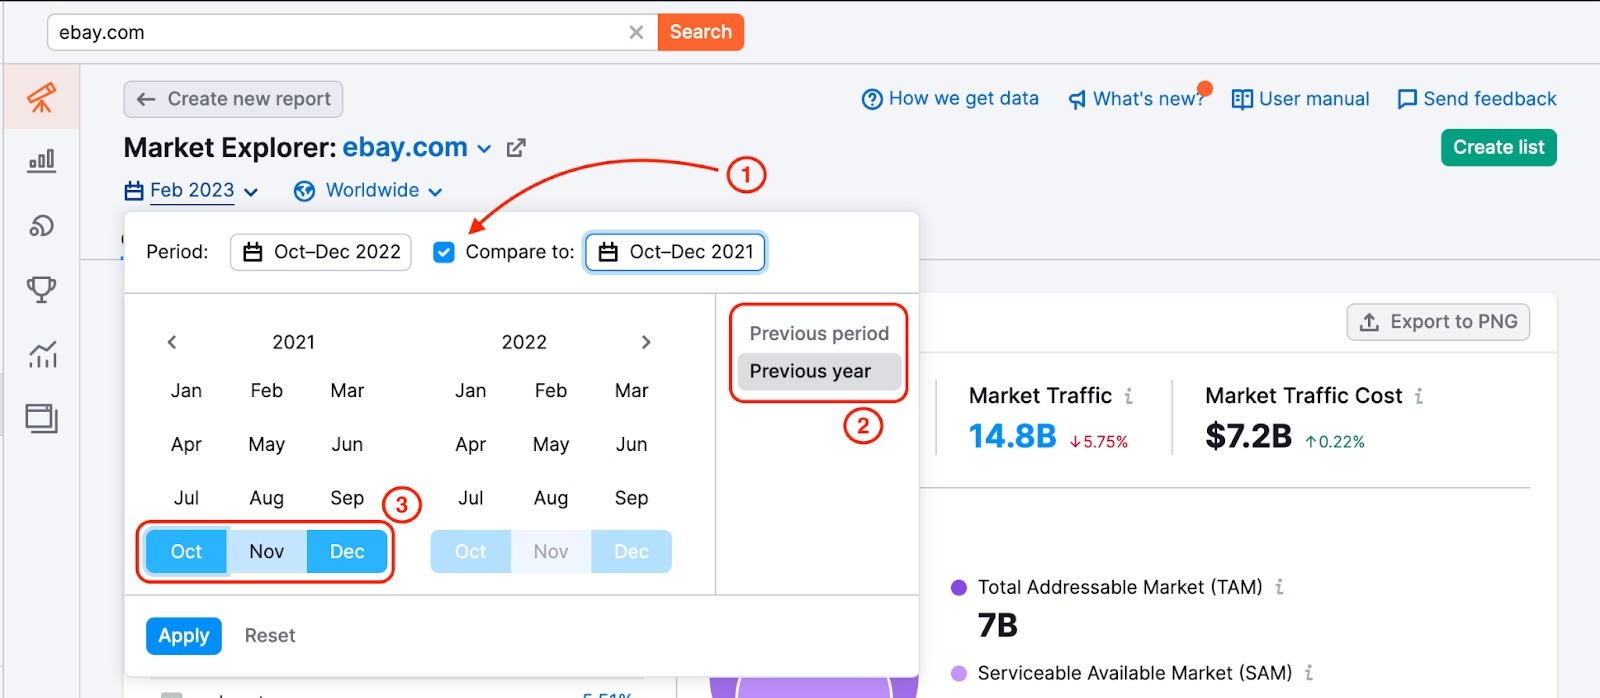 An example how to set up the custom time period comparison in the Market Explorer: 1 – a red arrow is pointing to the checkbox Compare to, 2 – a red rectangle is highlighting the comparison period on the left of the drop-down, 3 – a red rectangle is highlighting the date range from October 2021 to December 2021.